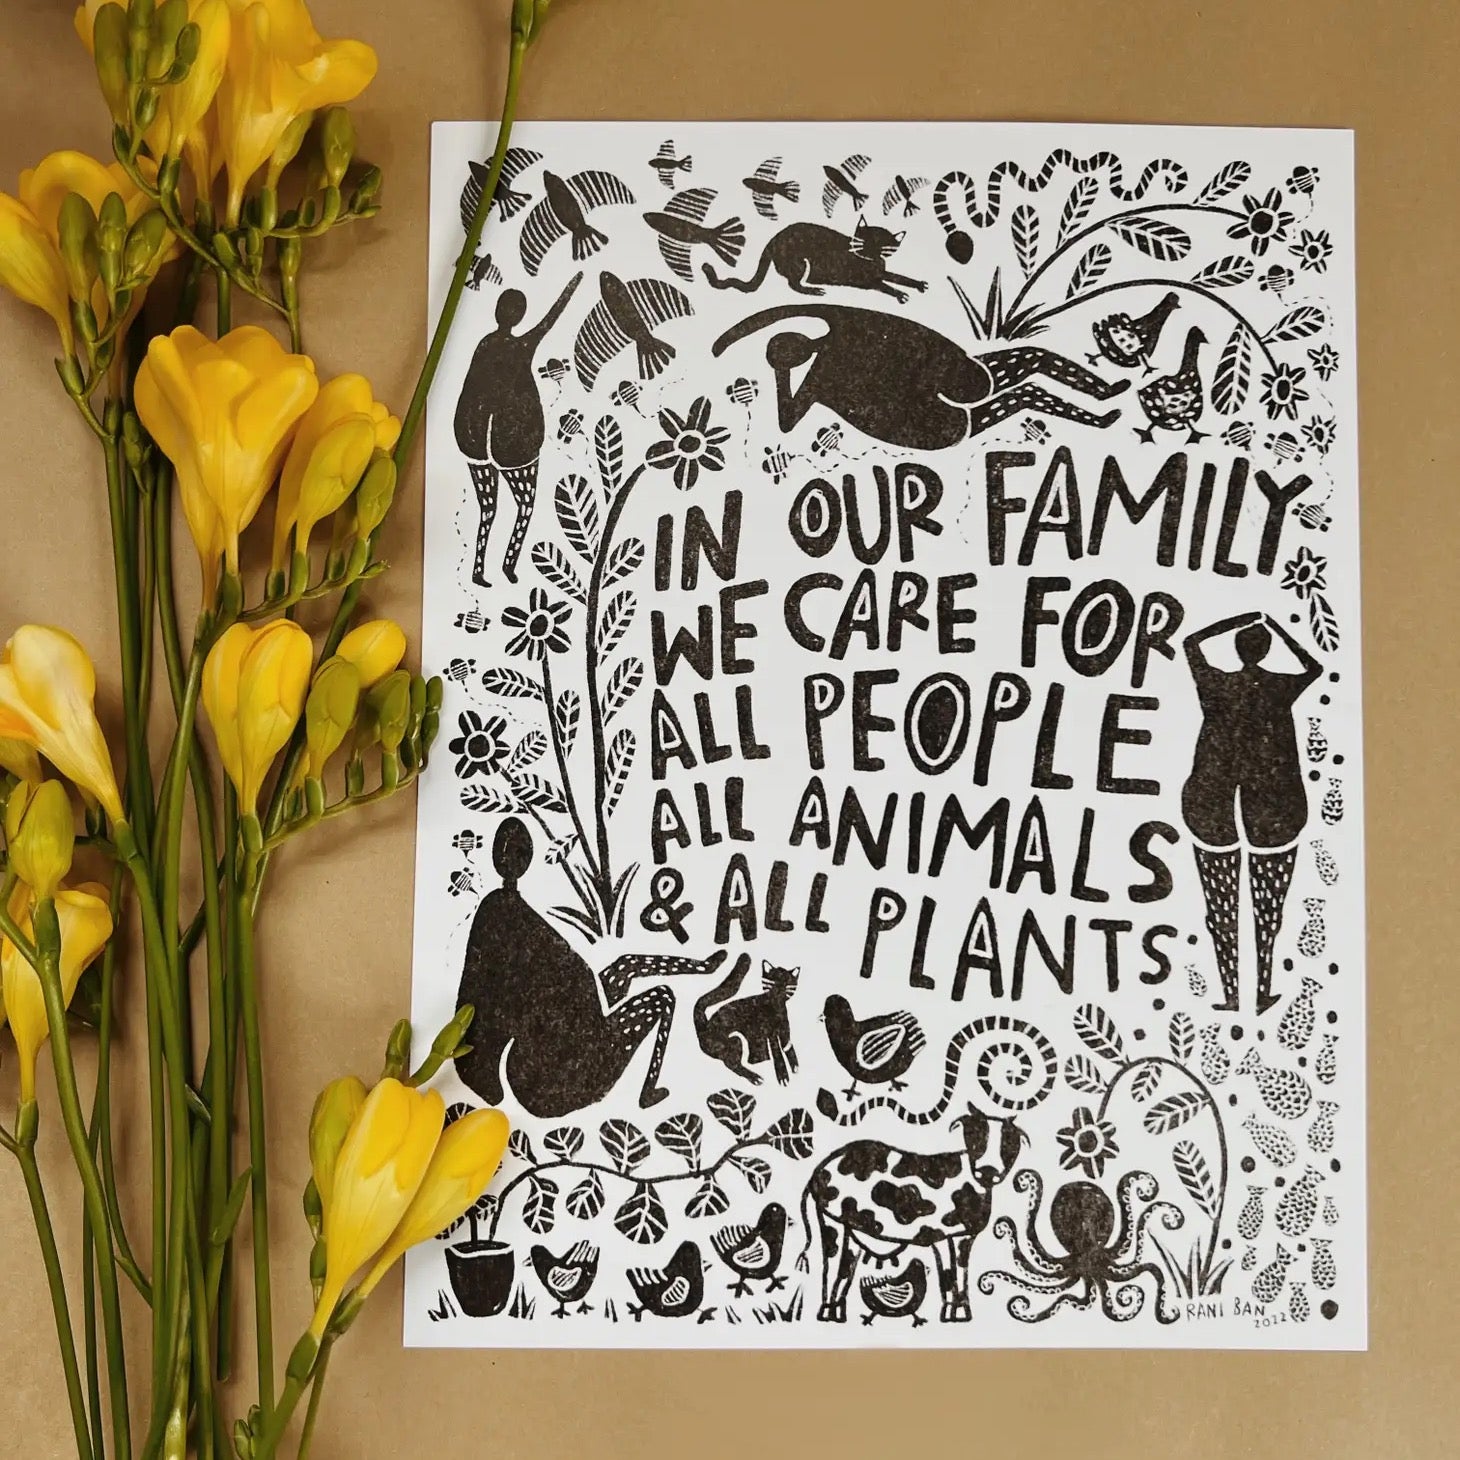 Our Family Print by Rani Ban Co.